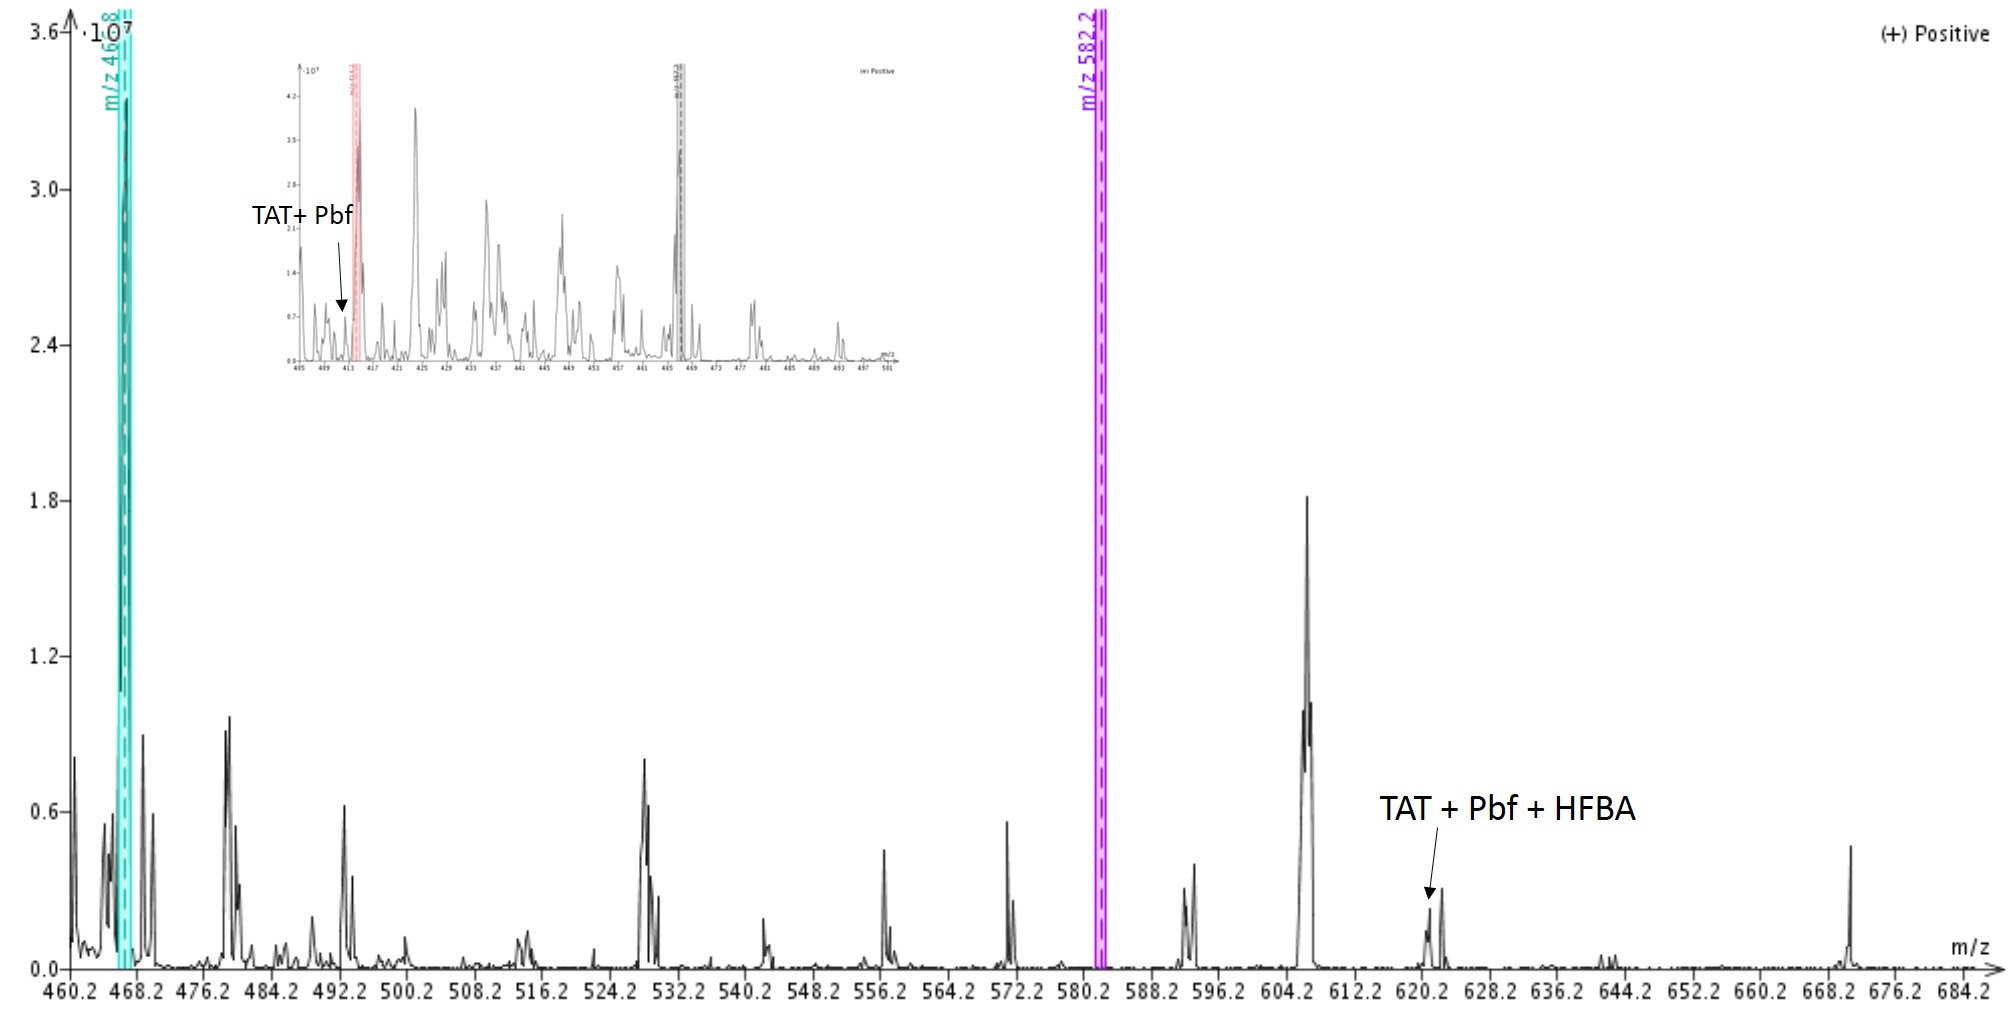 Figure 2. Mass spectrum of crude Tat peptide cleaved for only 1 hour. 